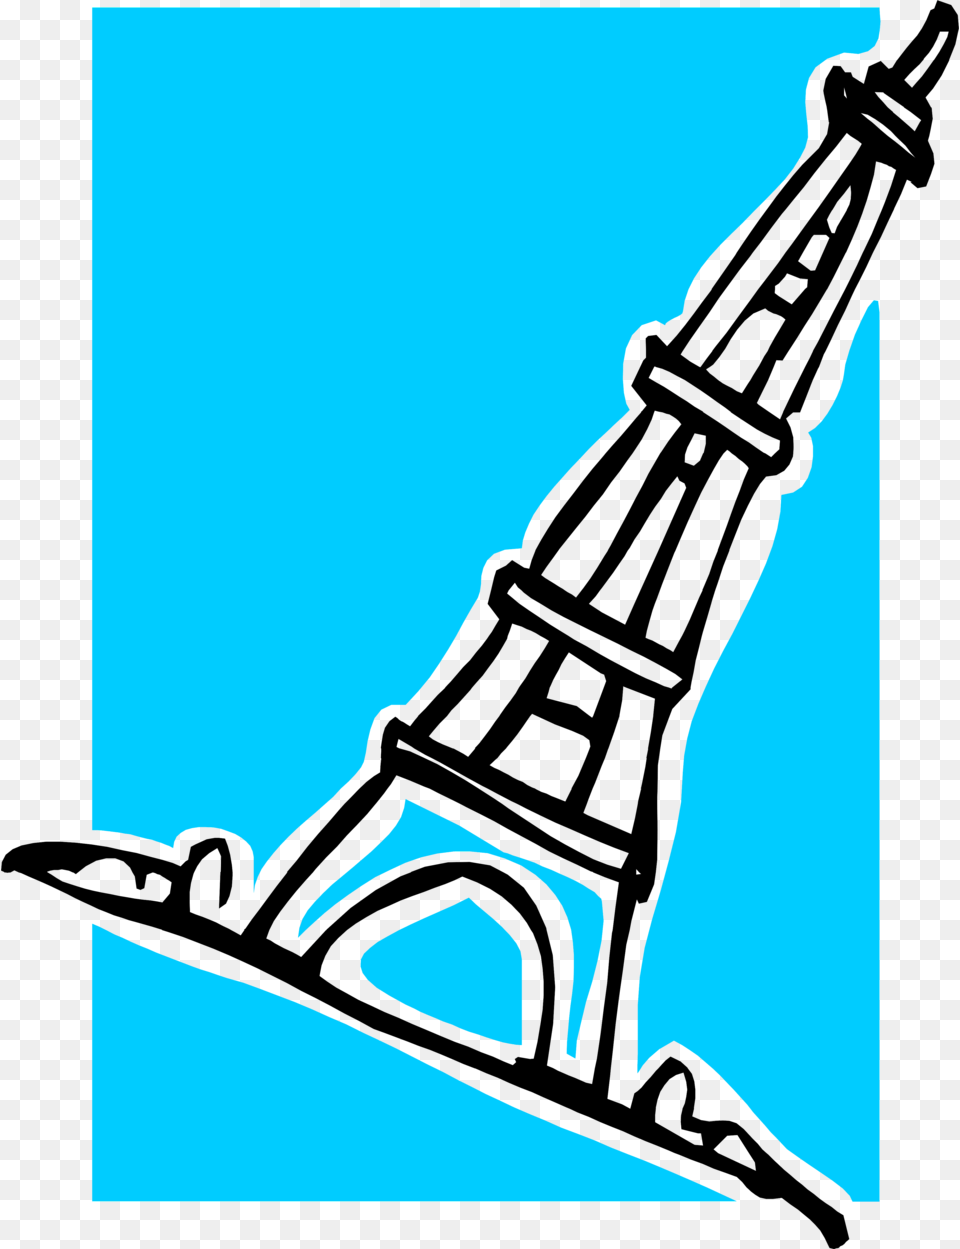 Eiffel Tower Stock Photo Illustration Of The Eiffel Tower, Person, Outdoors, Nature, Adventure Free Png